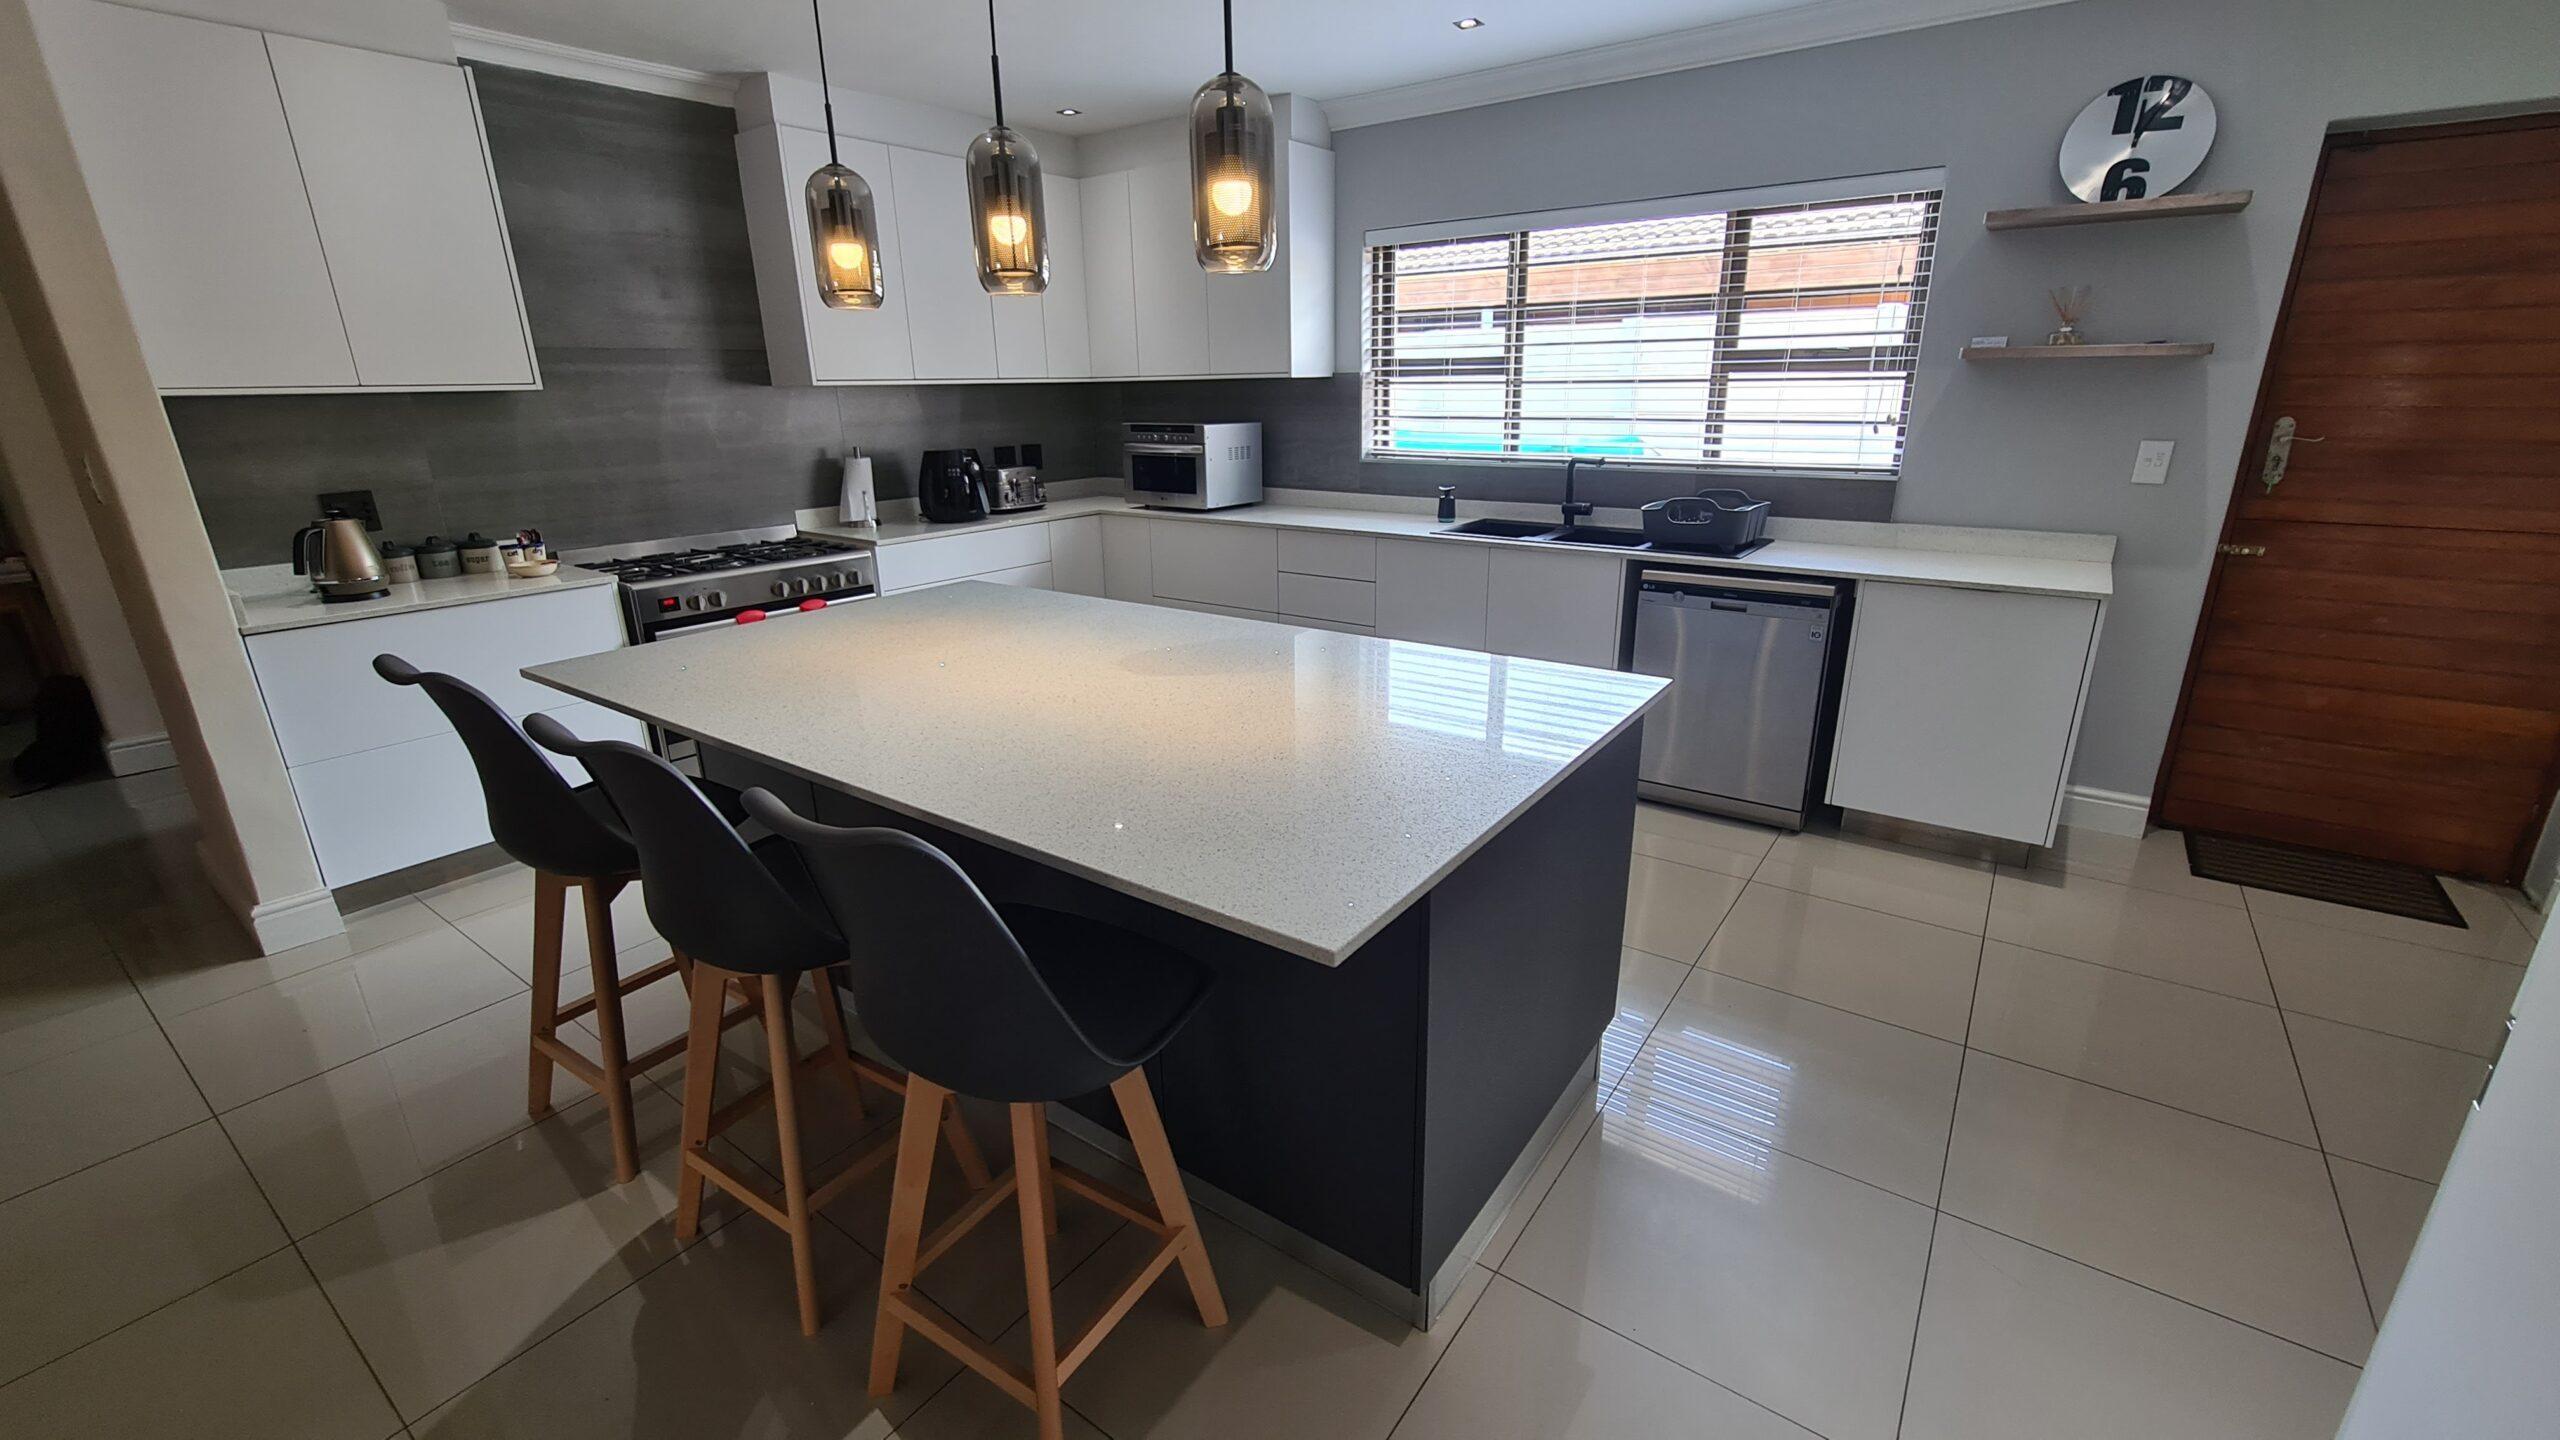 bespoke kitchen built with a custom island and seating with light countertops and white doors